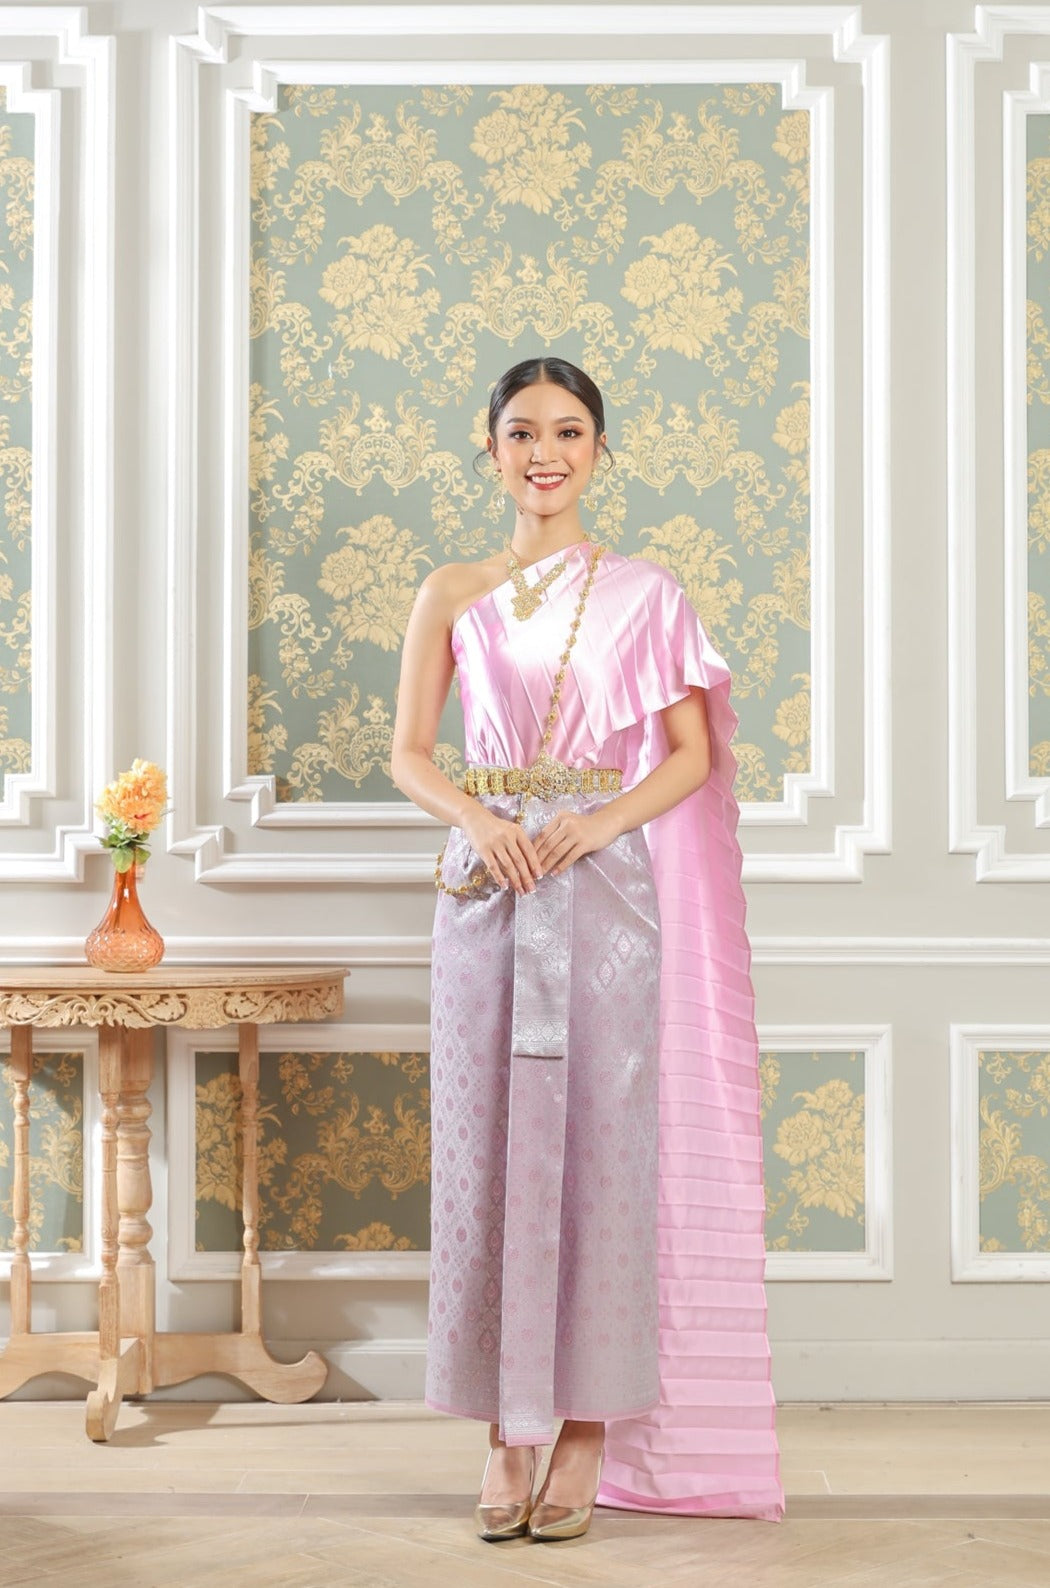 A woman wearing a pink Thai traditional dress.